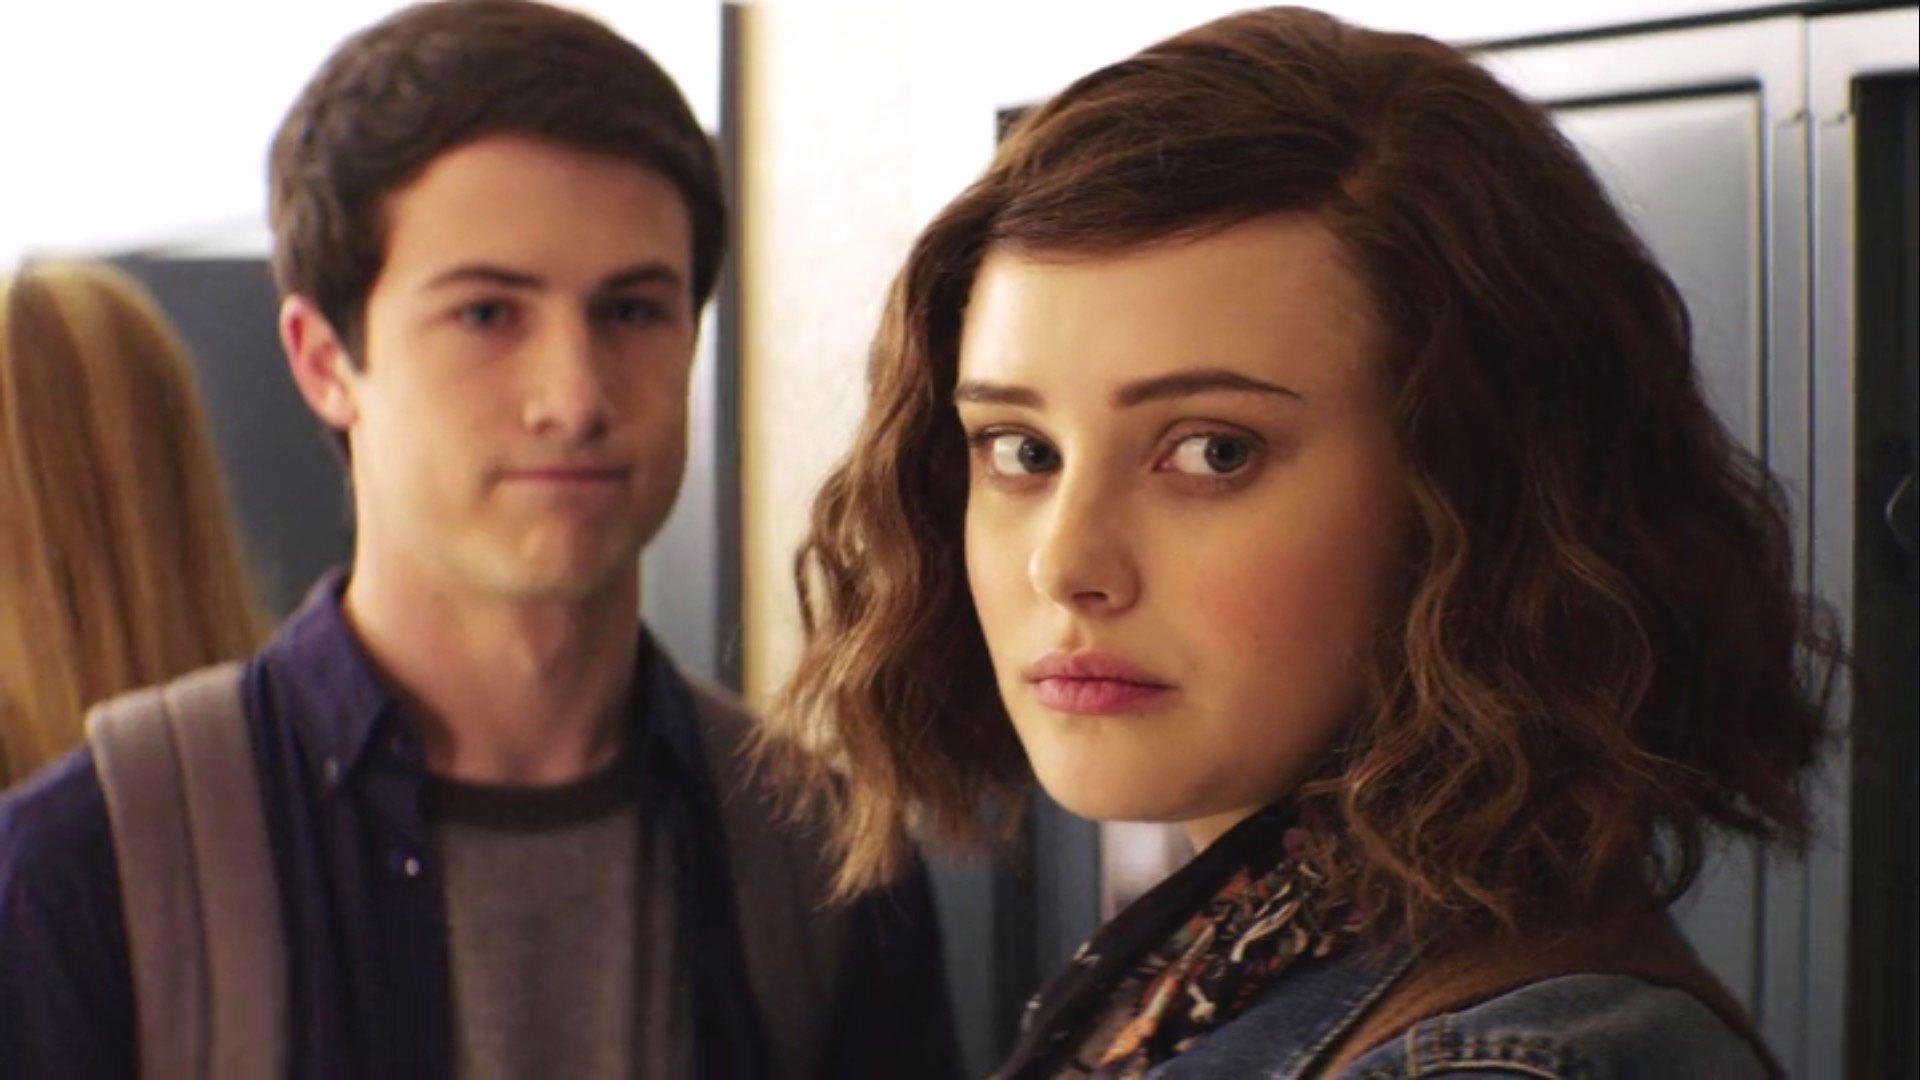 13 Reasons Why' Season 3 News, Date, Cast, Spoilers and Theories